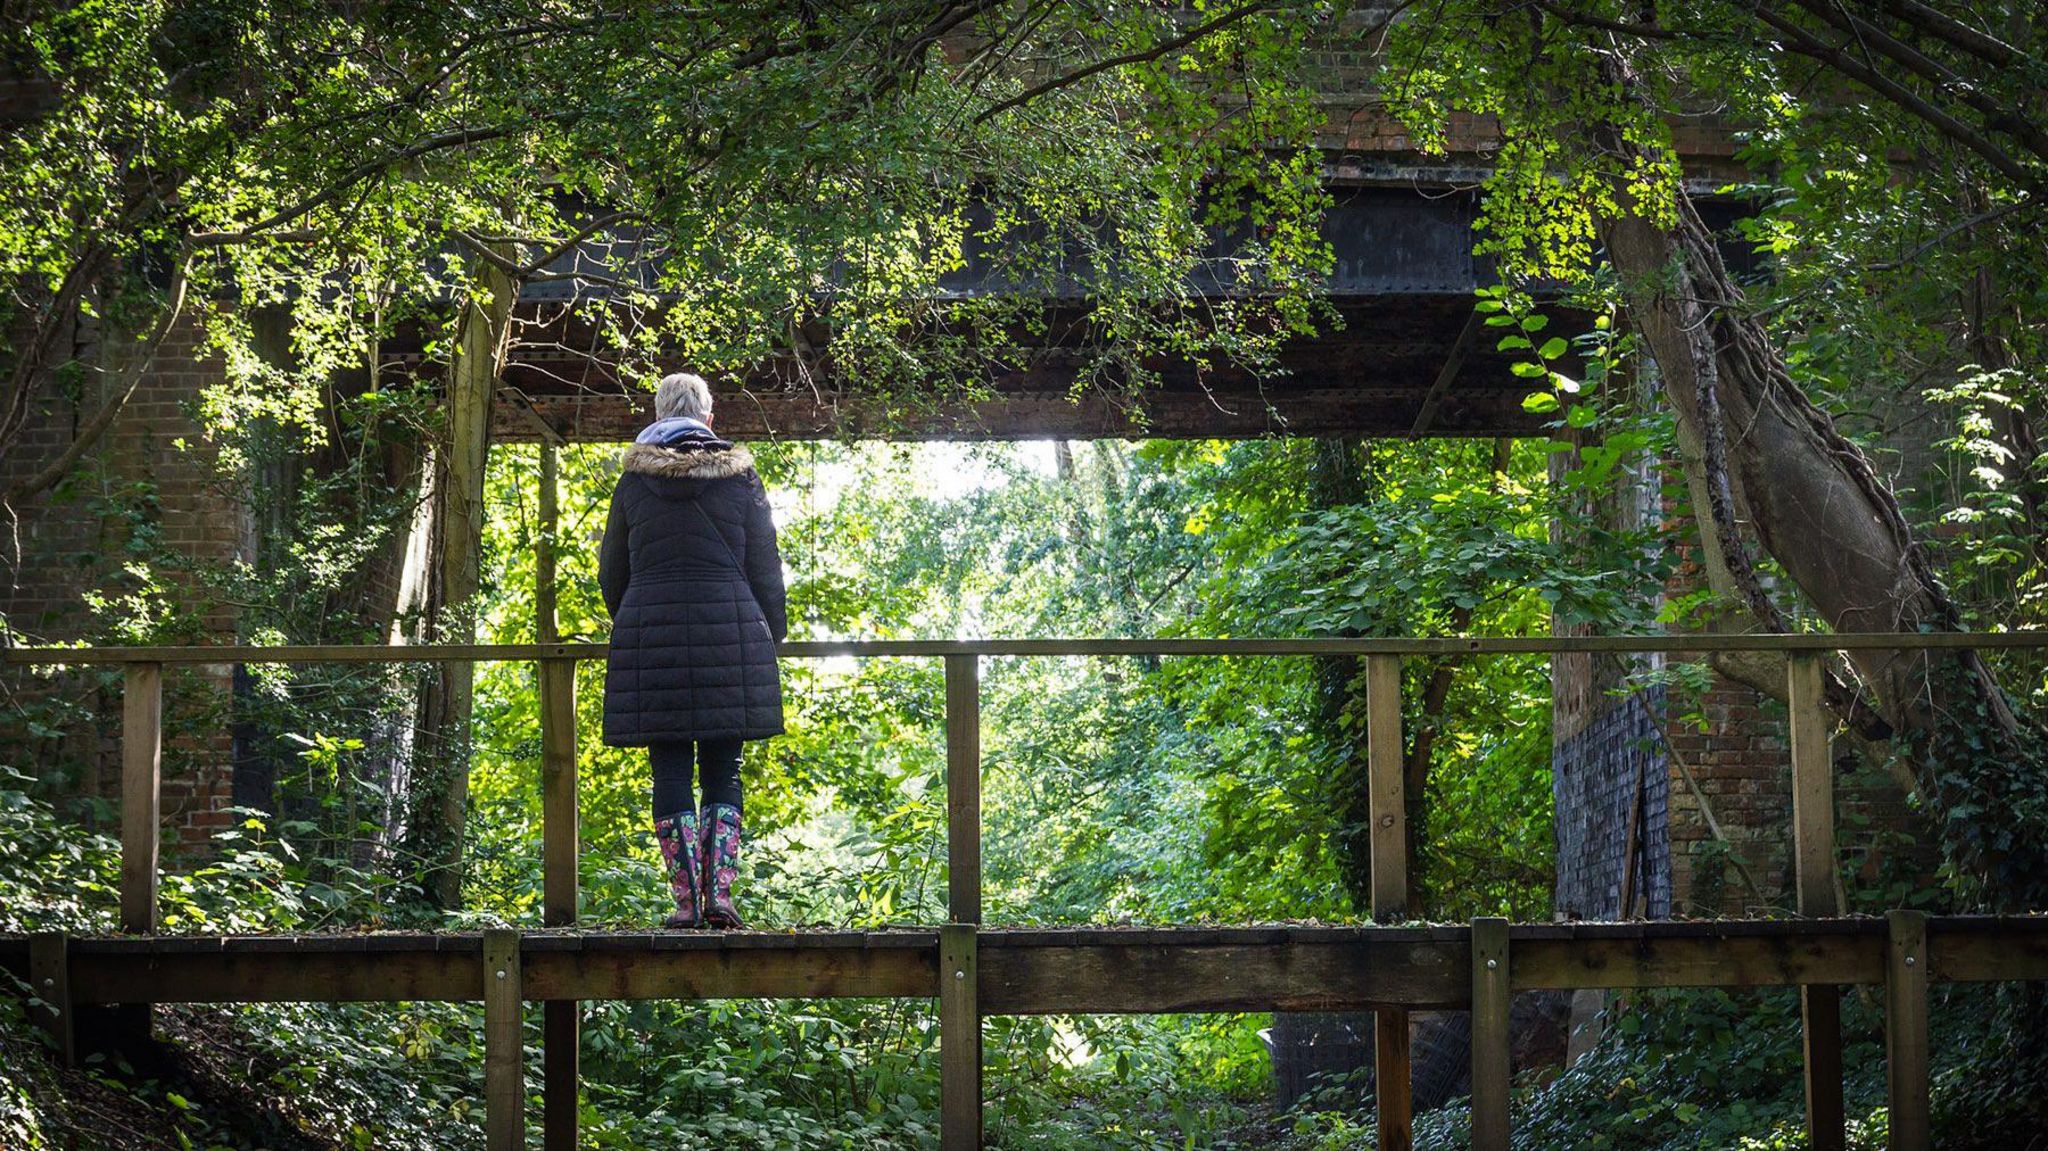 A woman with short white hair and a long black coat stands on a small wooden bridge looking away from camera at the Barcombe bridge structure which is surrounded by trees